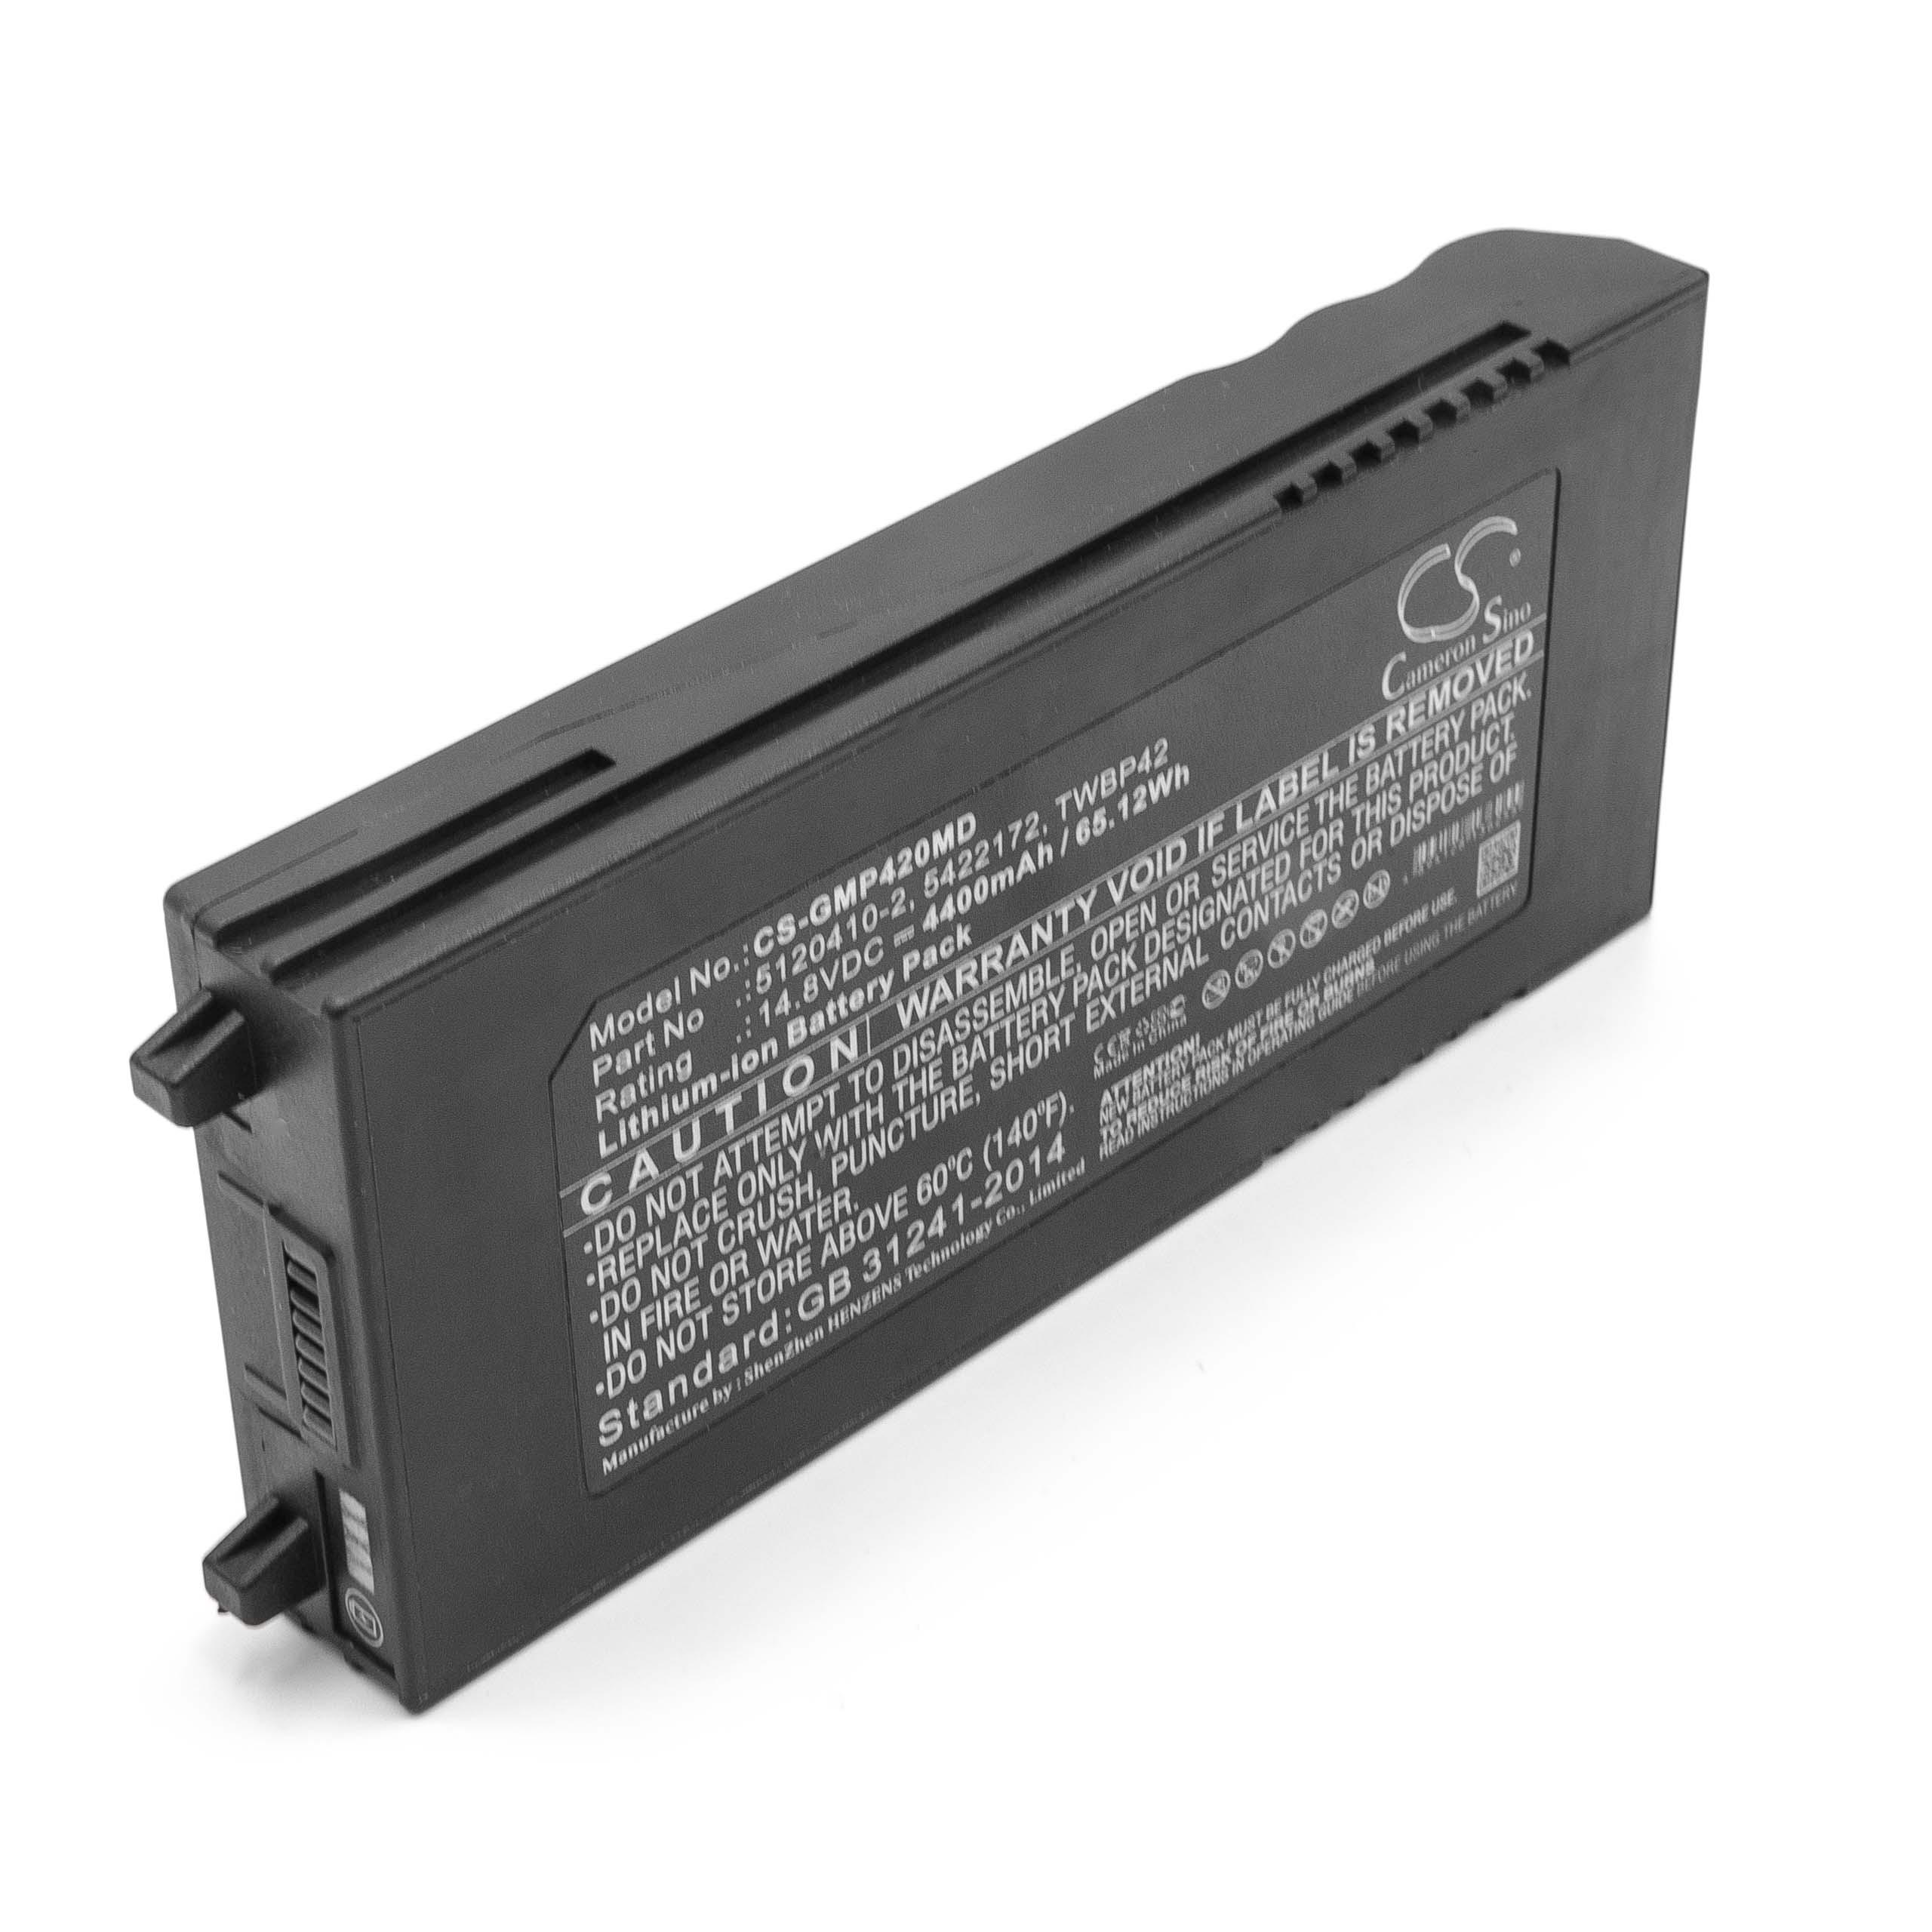 Medical Equipment Battery Replacement for GE M2836, M2836NO, 5422172, TWBP42, 5120410-2 - 4400mAh 14.8V Li-Ion